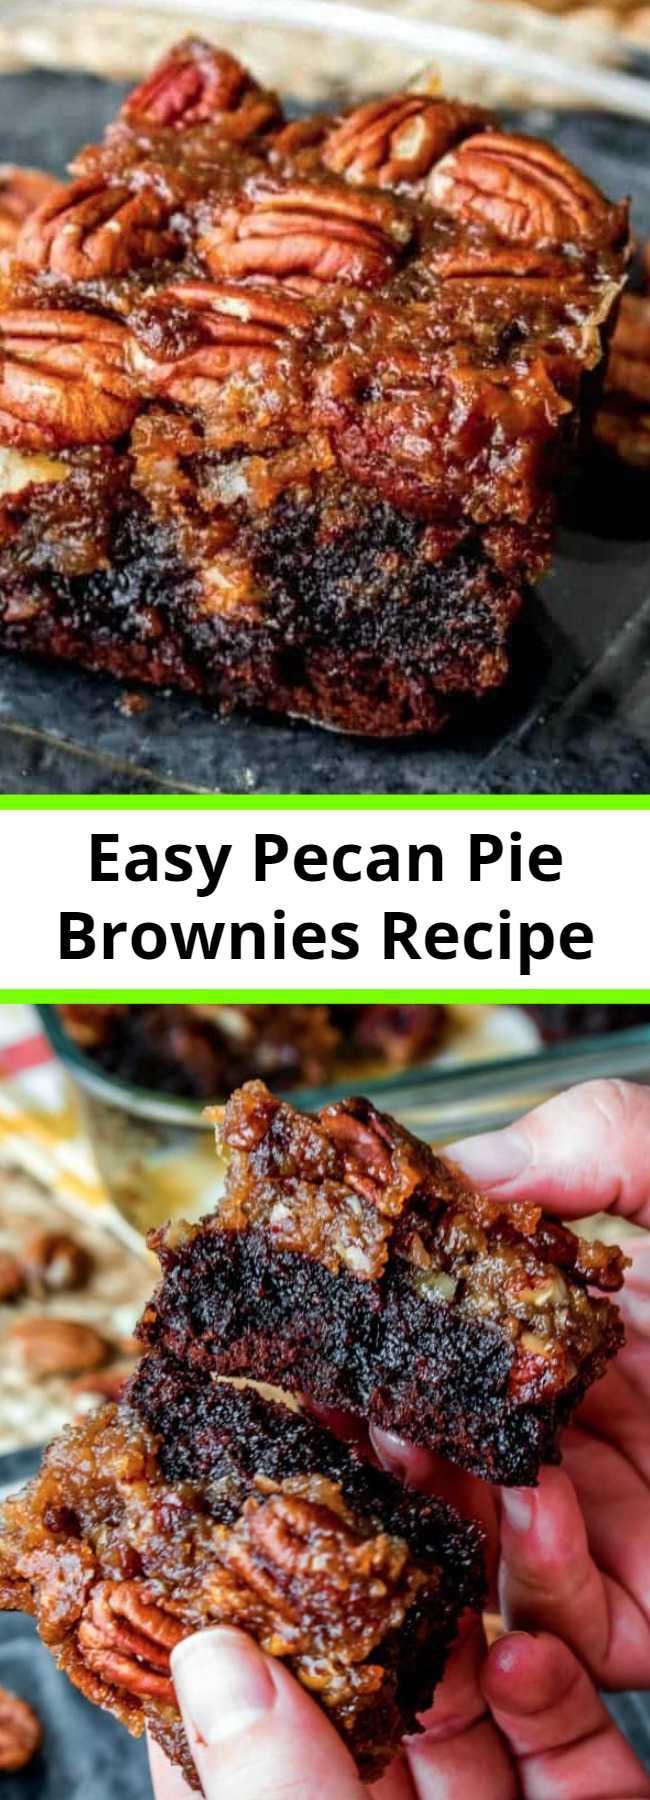 Easy Pecan Pie Brownies Recipe - These Pecan Pie Brownies are a chocolaty twist on the traditional pecan pie! They make a great Thanksgiving dessert but I like making them all year long!